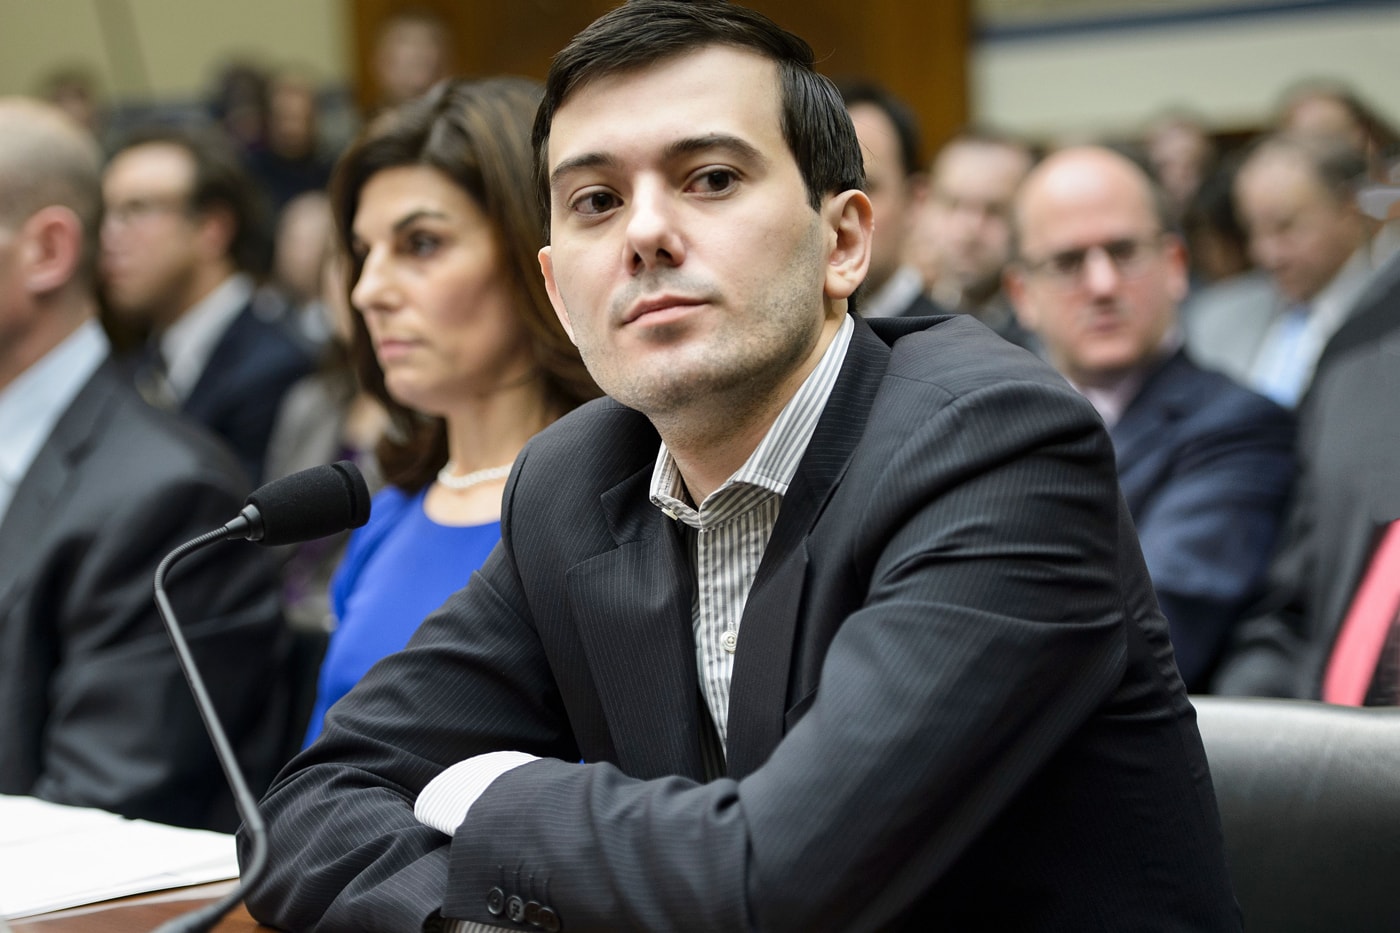 Martin Shkreli Offers $10 Million USD for The Life of Pablo